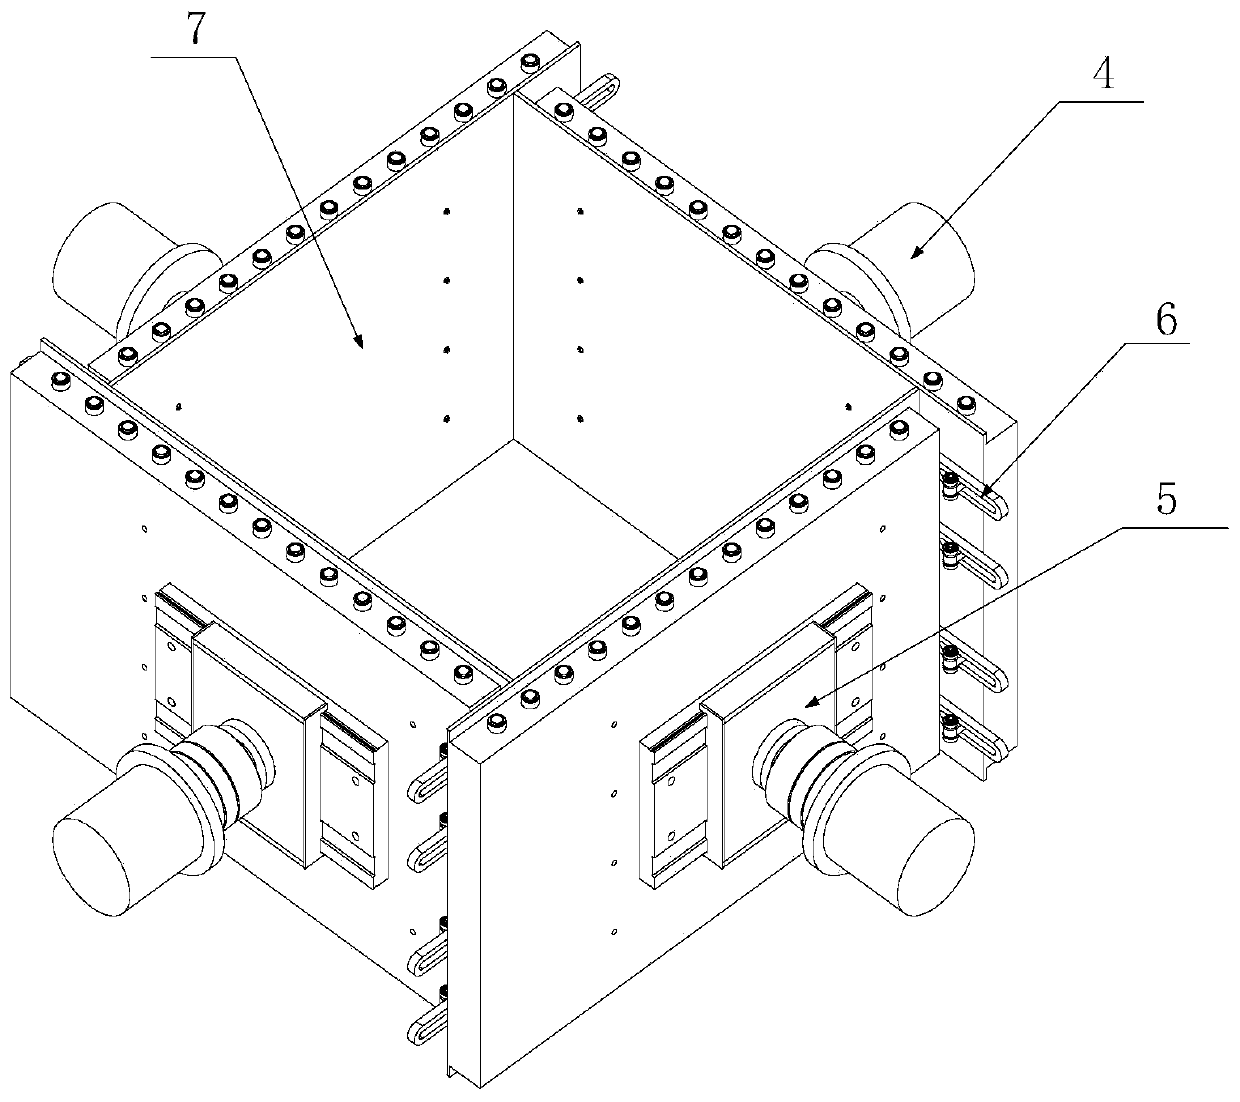 Deformable large-size soil box structure of true triaxial experiment of soil engineering